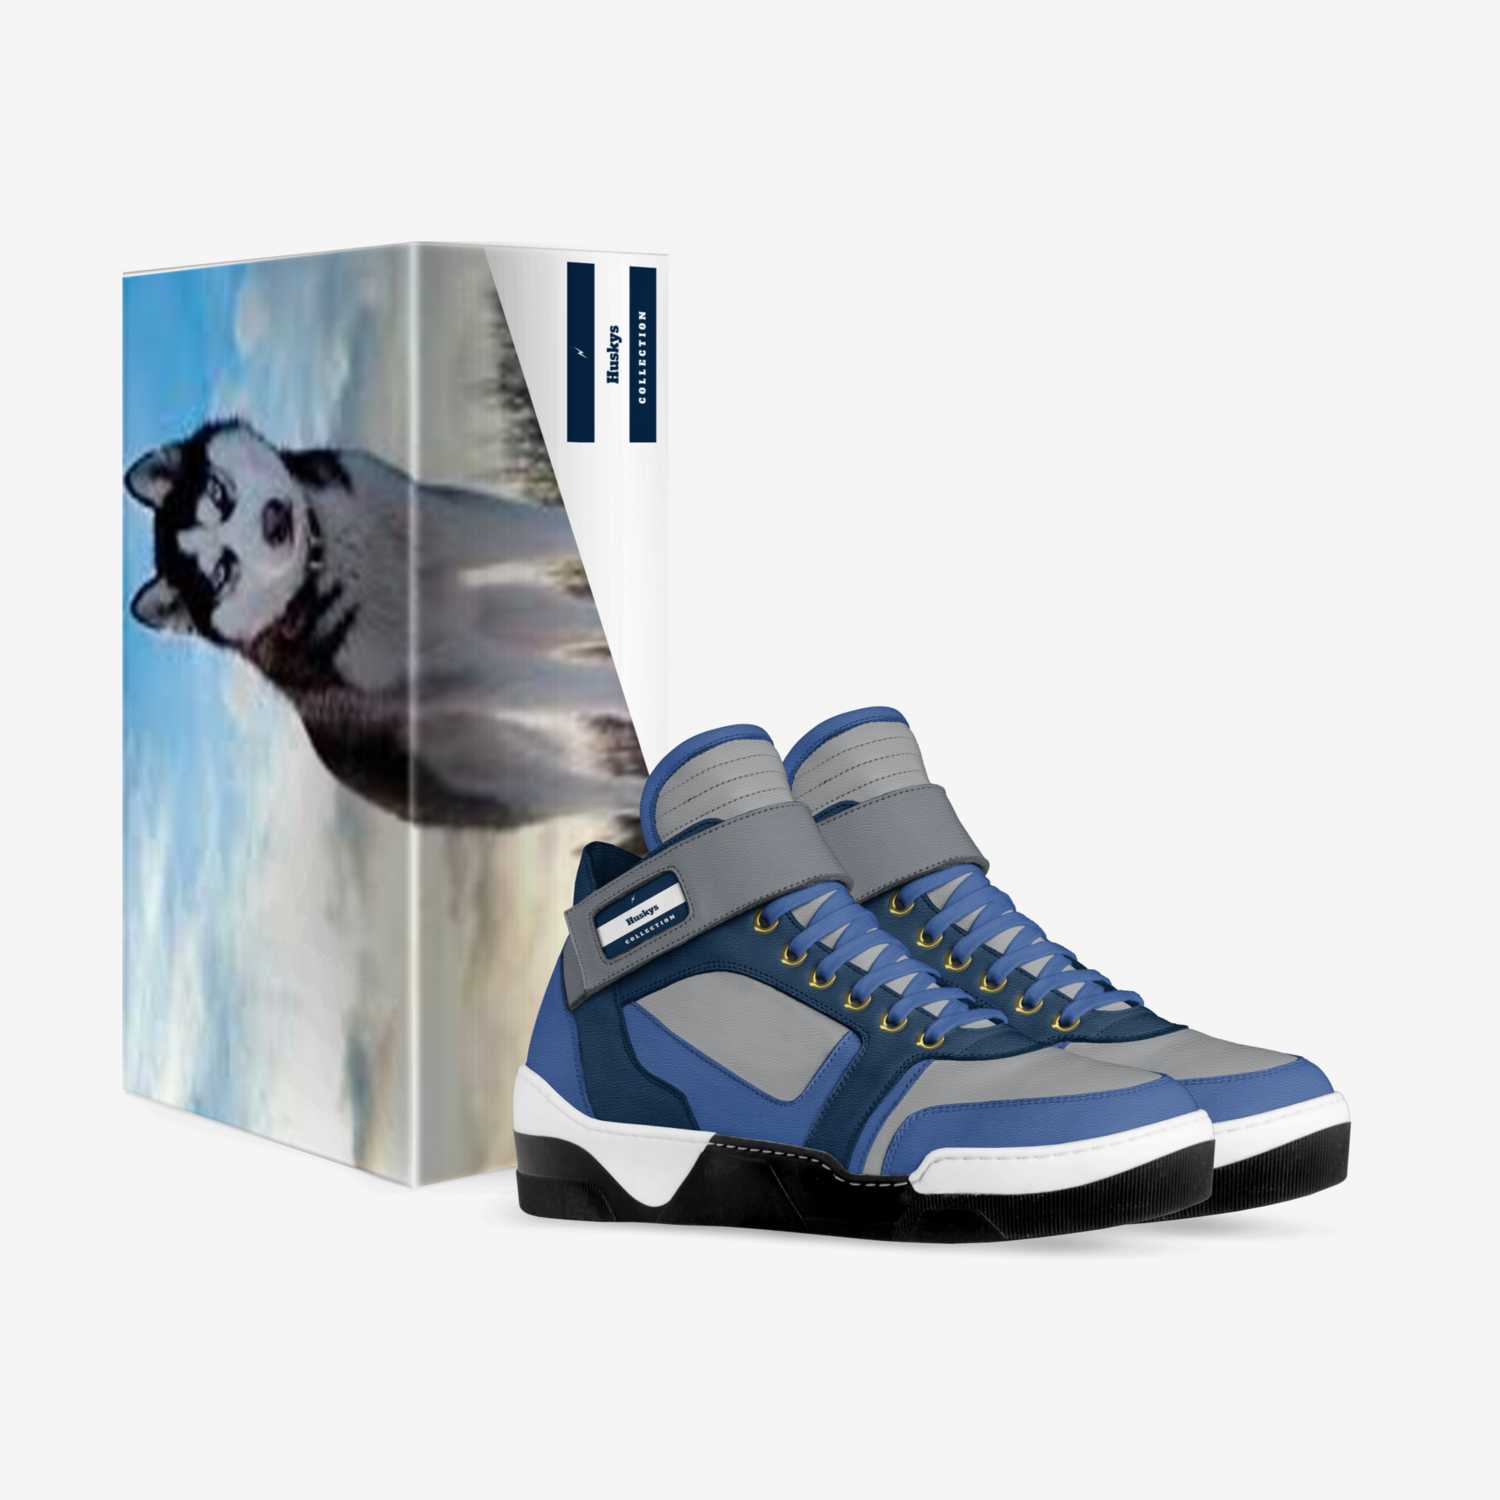 Huskys custom made in Italy shoes by Diego Hieatt | Box view